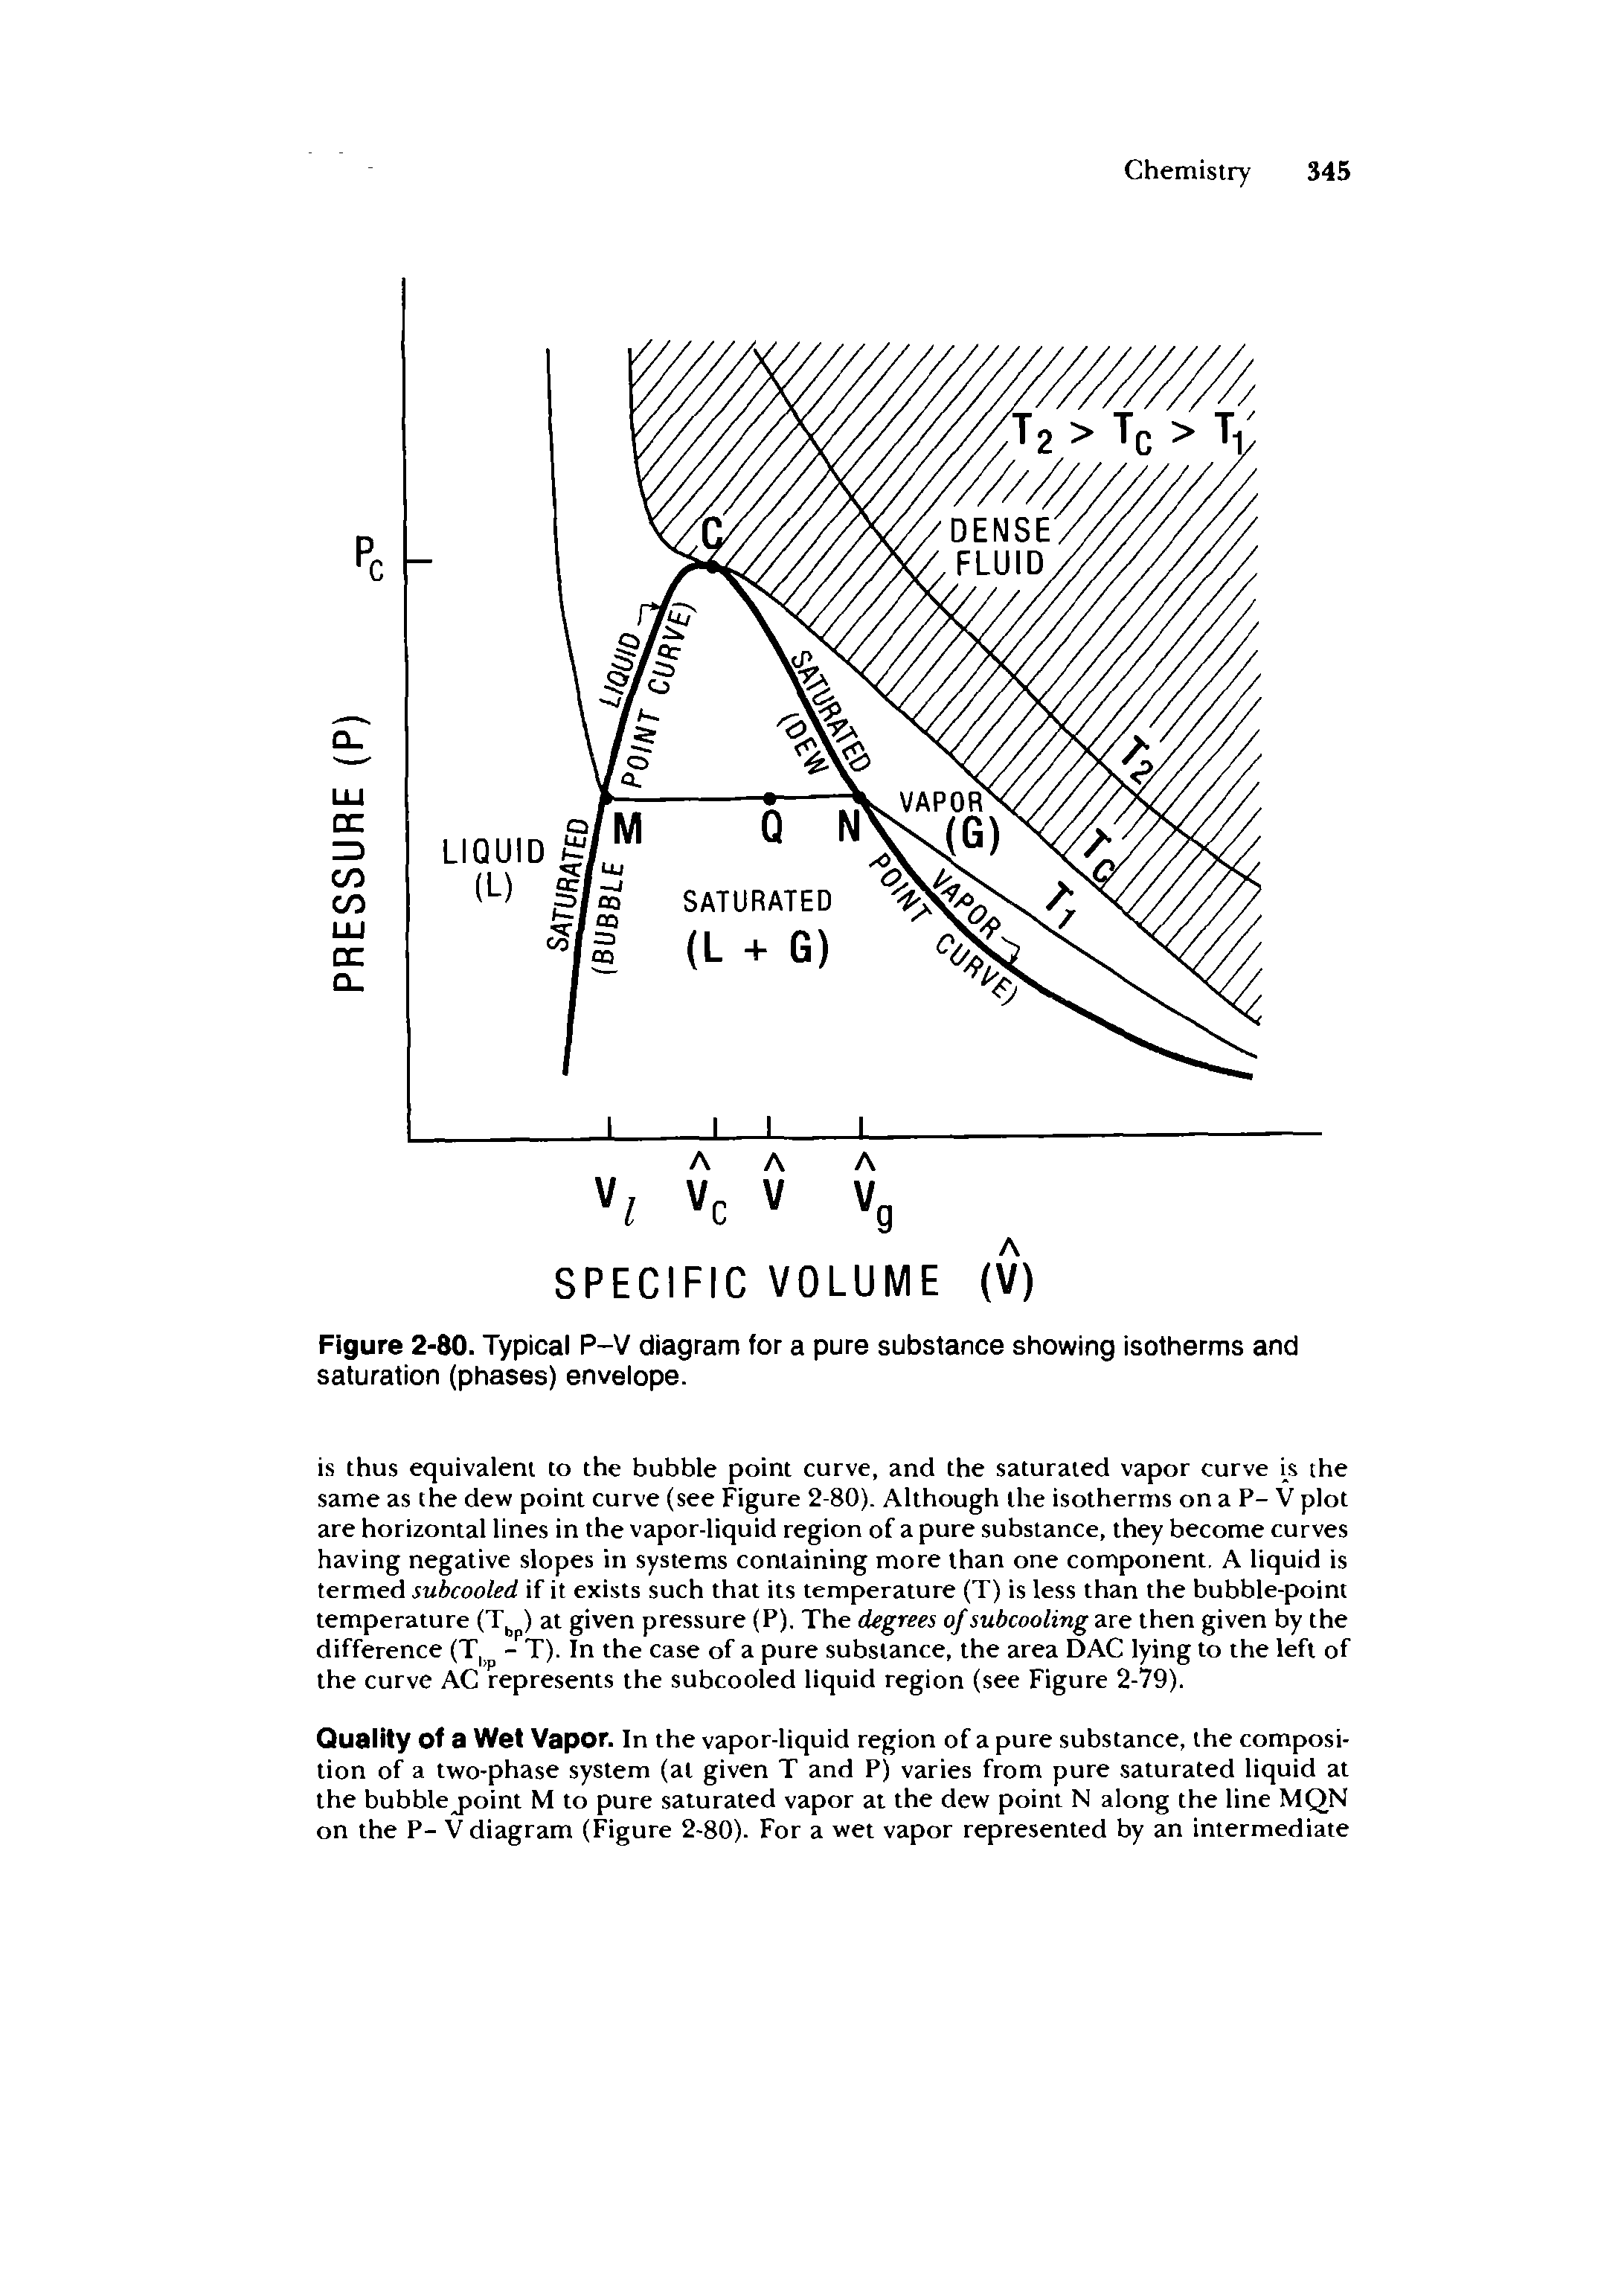 Figure 2-80. Typical P-V diagram for a pure substance showing isotherms and saturation (phases) envelope.